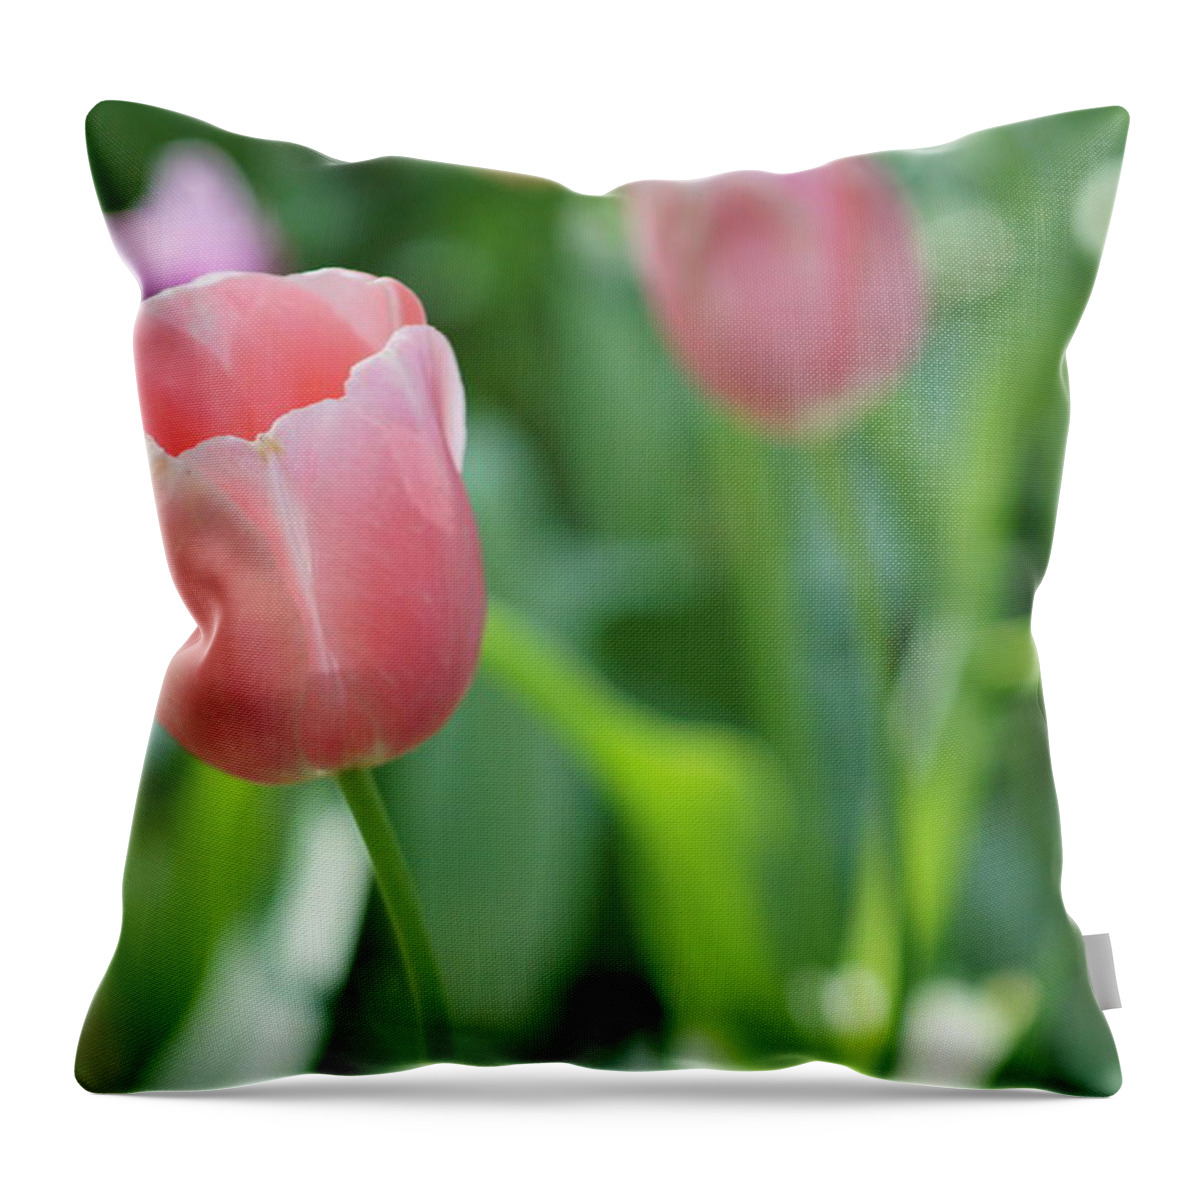 Flowers Throw Pillow featuring the photograph Tulip by Kathy Churchman